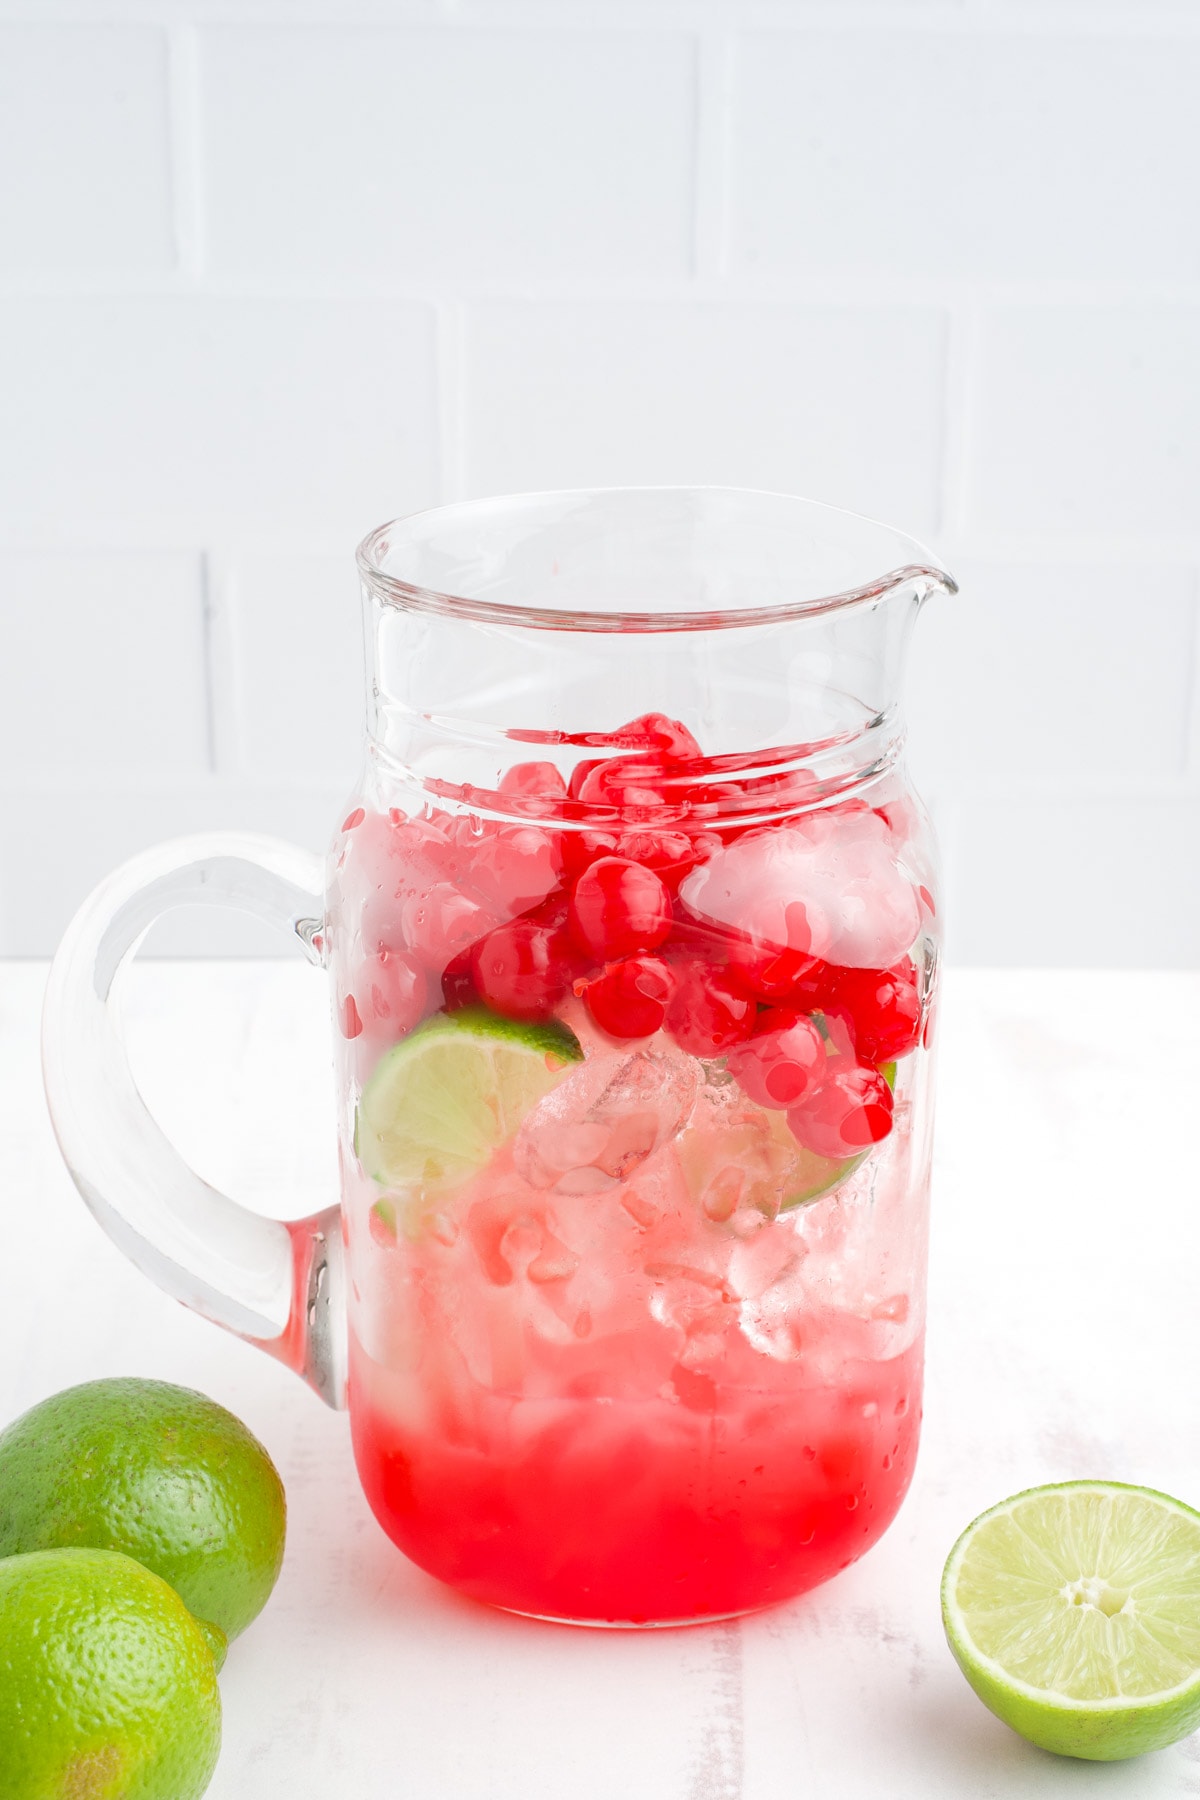 Ice, limes and cherries in a large pitcher. 